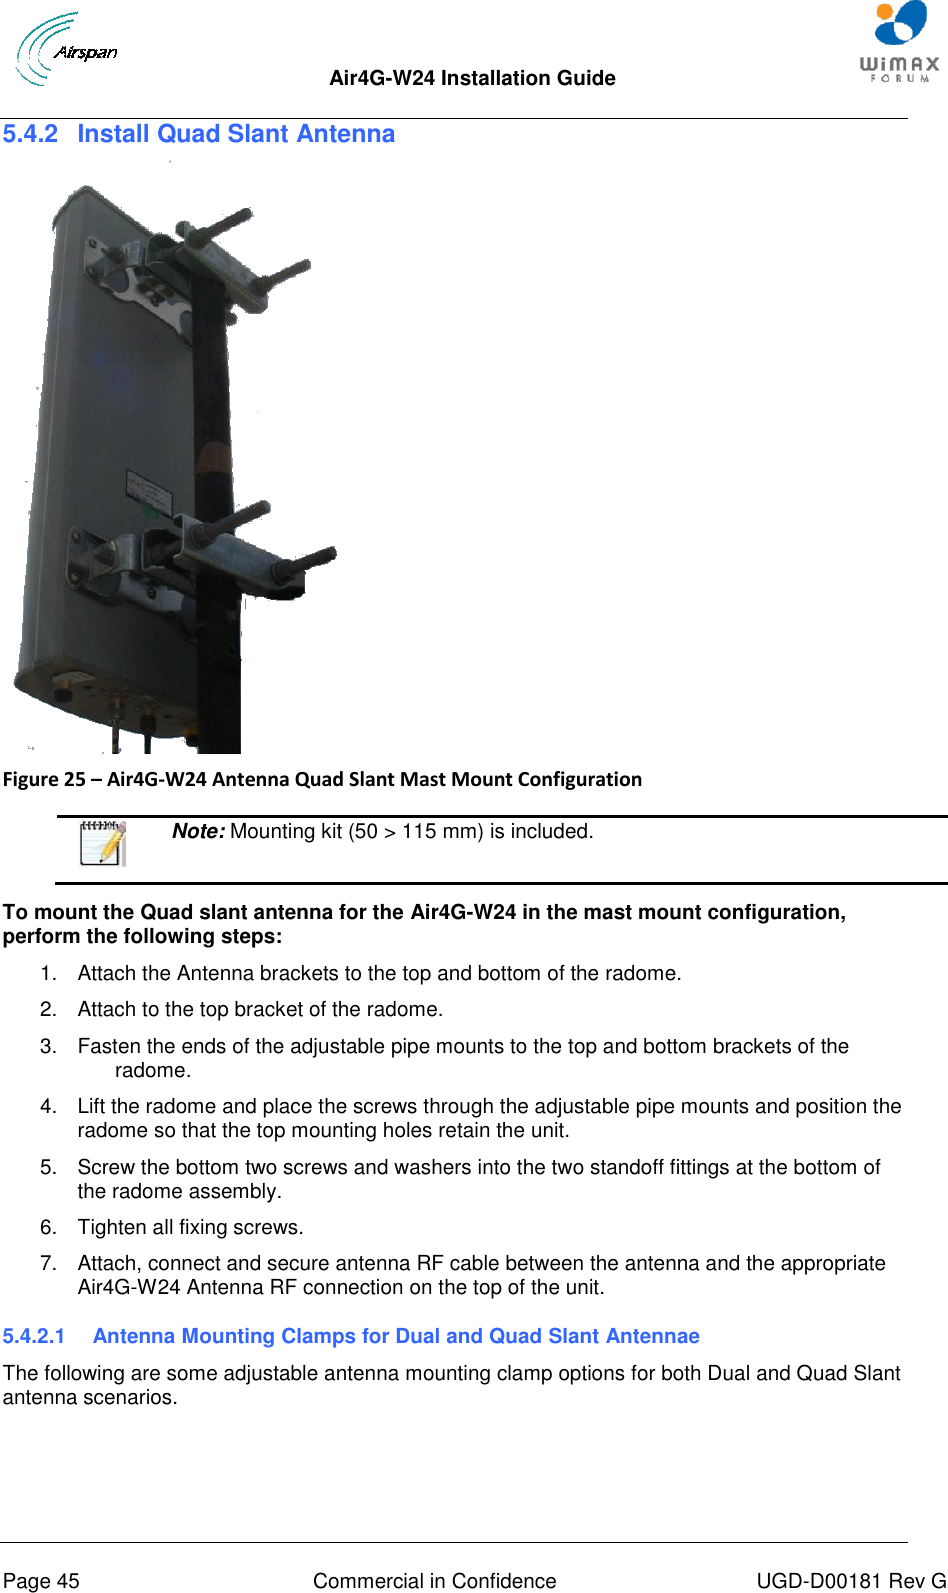  Air4G-W24 Installation Guide       Page 45  Commercial in Confidence  UGD-D00181 Rev G 5.4.2  Install Quad Slant Antenna    Figure 25 – Air4G-W24 Antenna Quad Slant Mast Mount Configuration    Note: Mounting kit (50 &gt; 115 mm) is included.  To mount the Quad slant antenna for the Air4G-W24 in the mast mount configuration, perform the following steps: 1.  Attach the Antenna brackets to the top and bottom of the radome.  2.  Attach to the top bracket of the radome. 3.  Fasten the ends of the adjustable pipe mounts to the top and bottom brackets of the radome. 4.  Lift the radome and place the screws through the adjustable pipe mounts and position the radome so that the top mounting holes retain the unit. 5.  Screw the bottom two screws and washers into the two standoff fittings at the bottom of the radome assembly. 6.  Tighten all fixing screws. 7.  Attach, connect and secure antenna RF cable between the antenna and the appropriate Air4G-W24 Antenna RF connection on the top of the unit. 5.4.2.1  Antenna Mounting Clamps for Dual and Quad Slant Antennae The following are some adjustable antenna mounting clamp options for both Dual and Quad Slant antenna scenarios.  